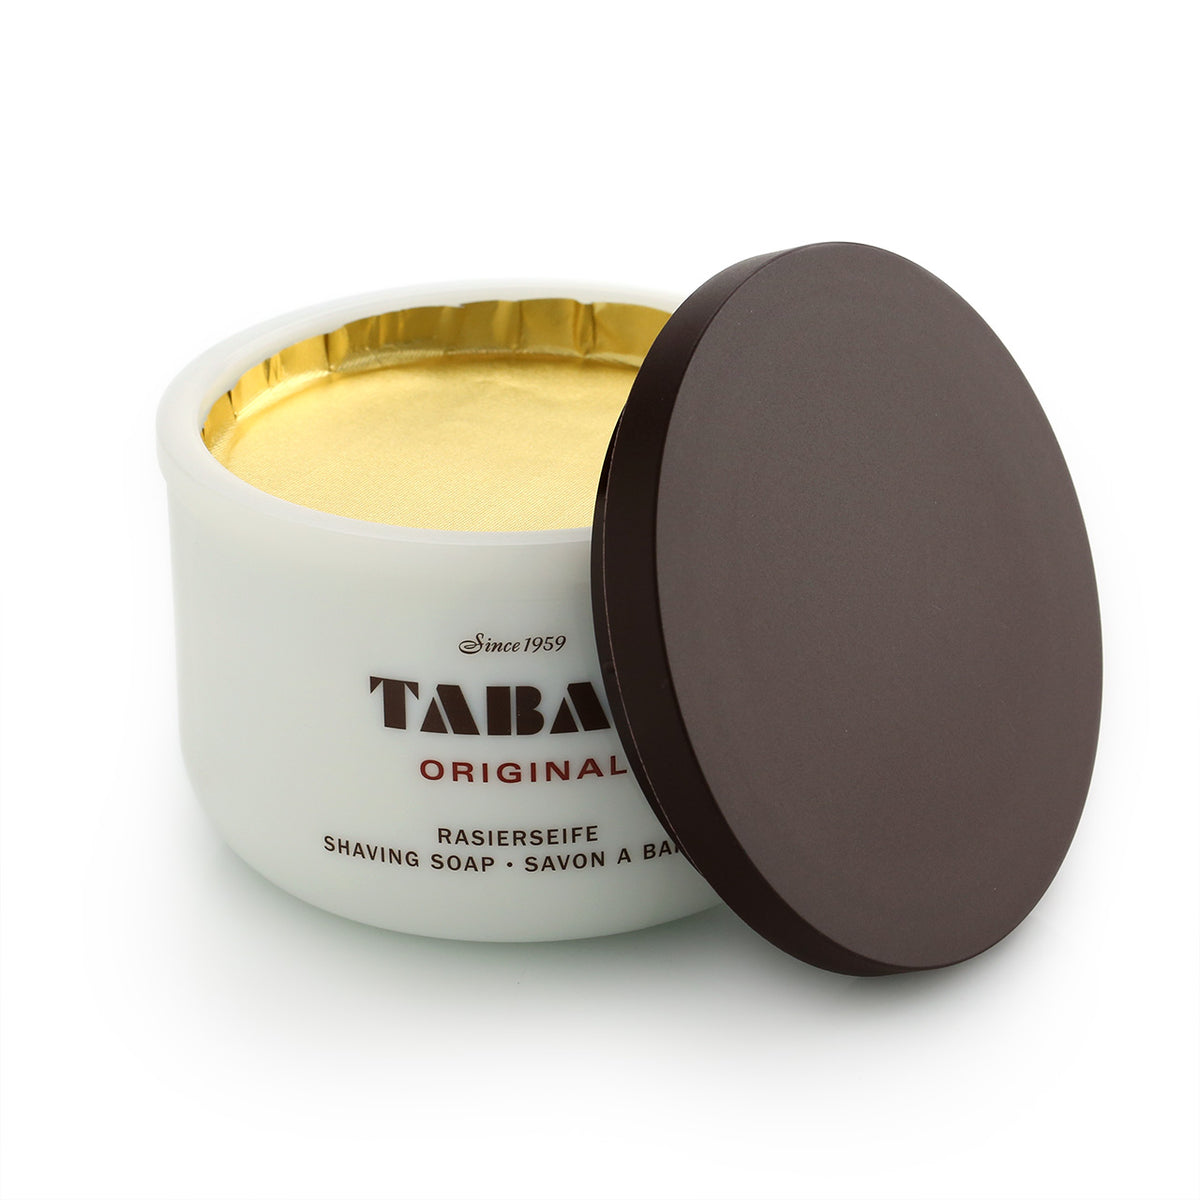 Tabac Original Shaving Soap in a white glass bowl - shown with foil protective packaging